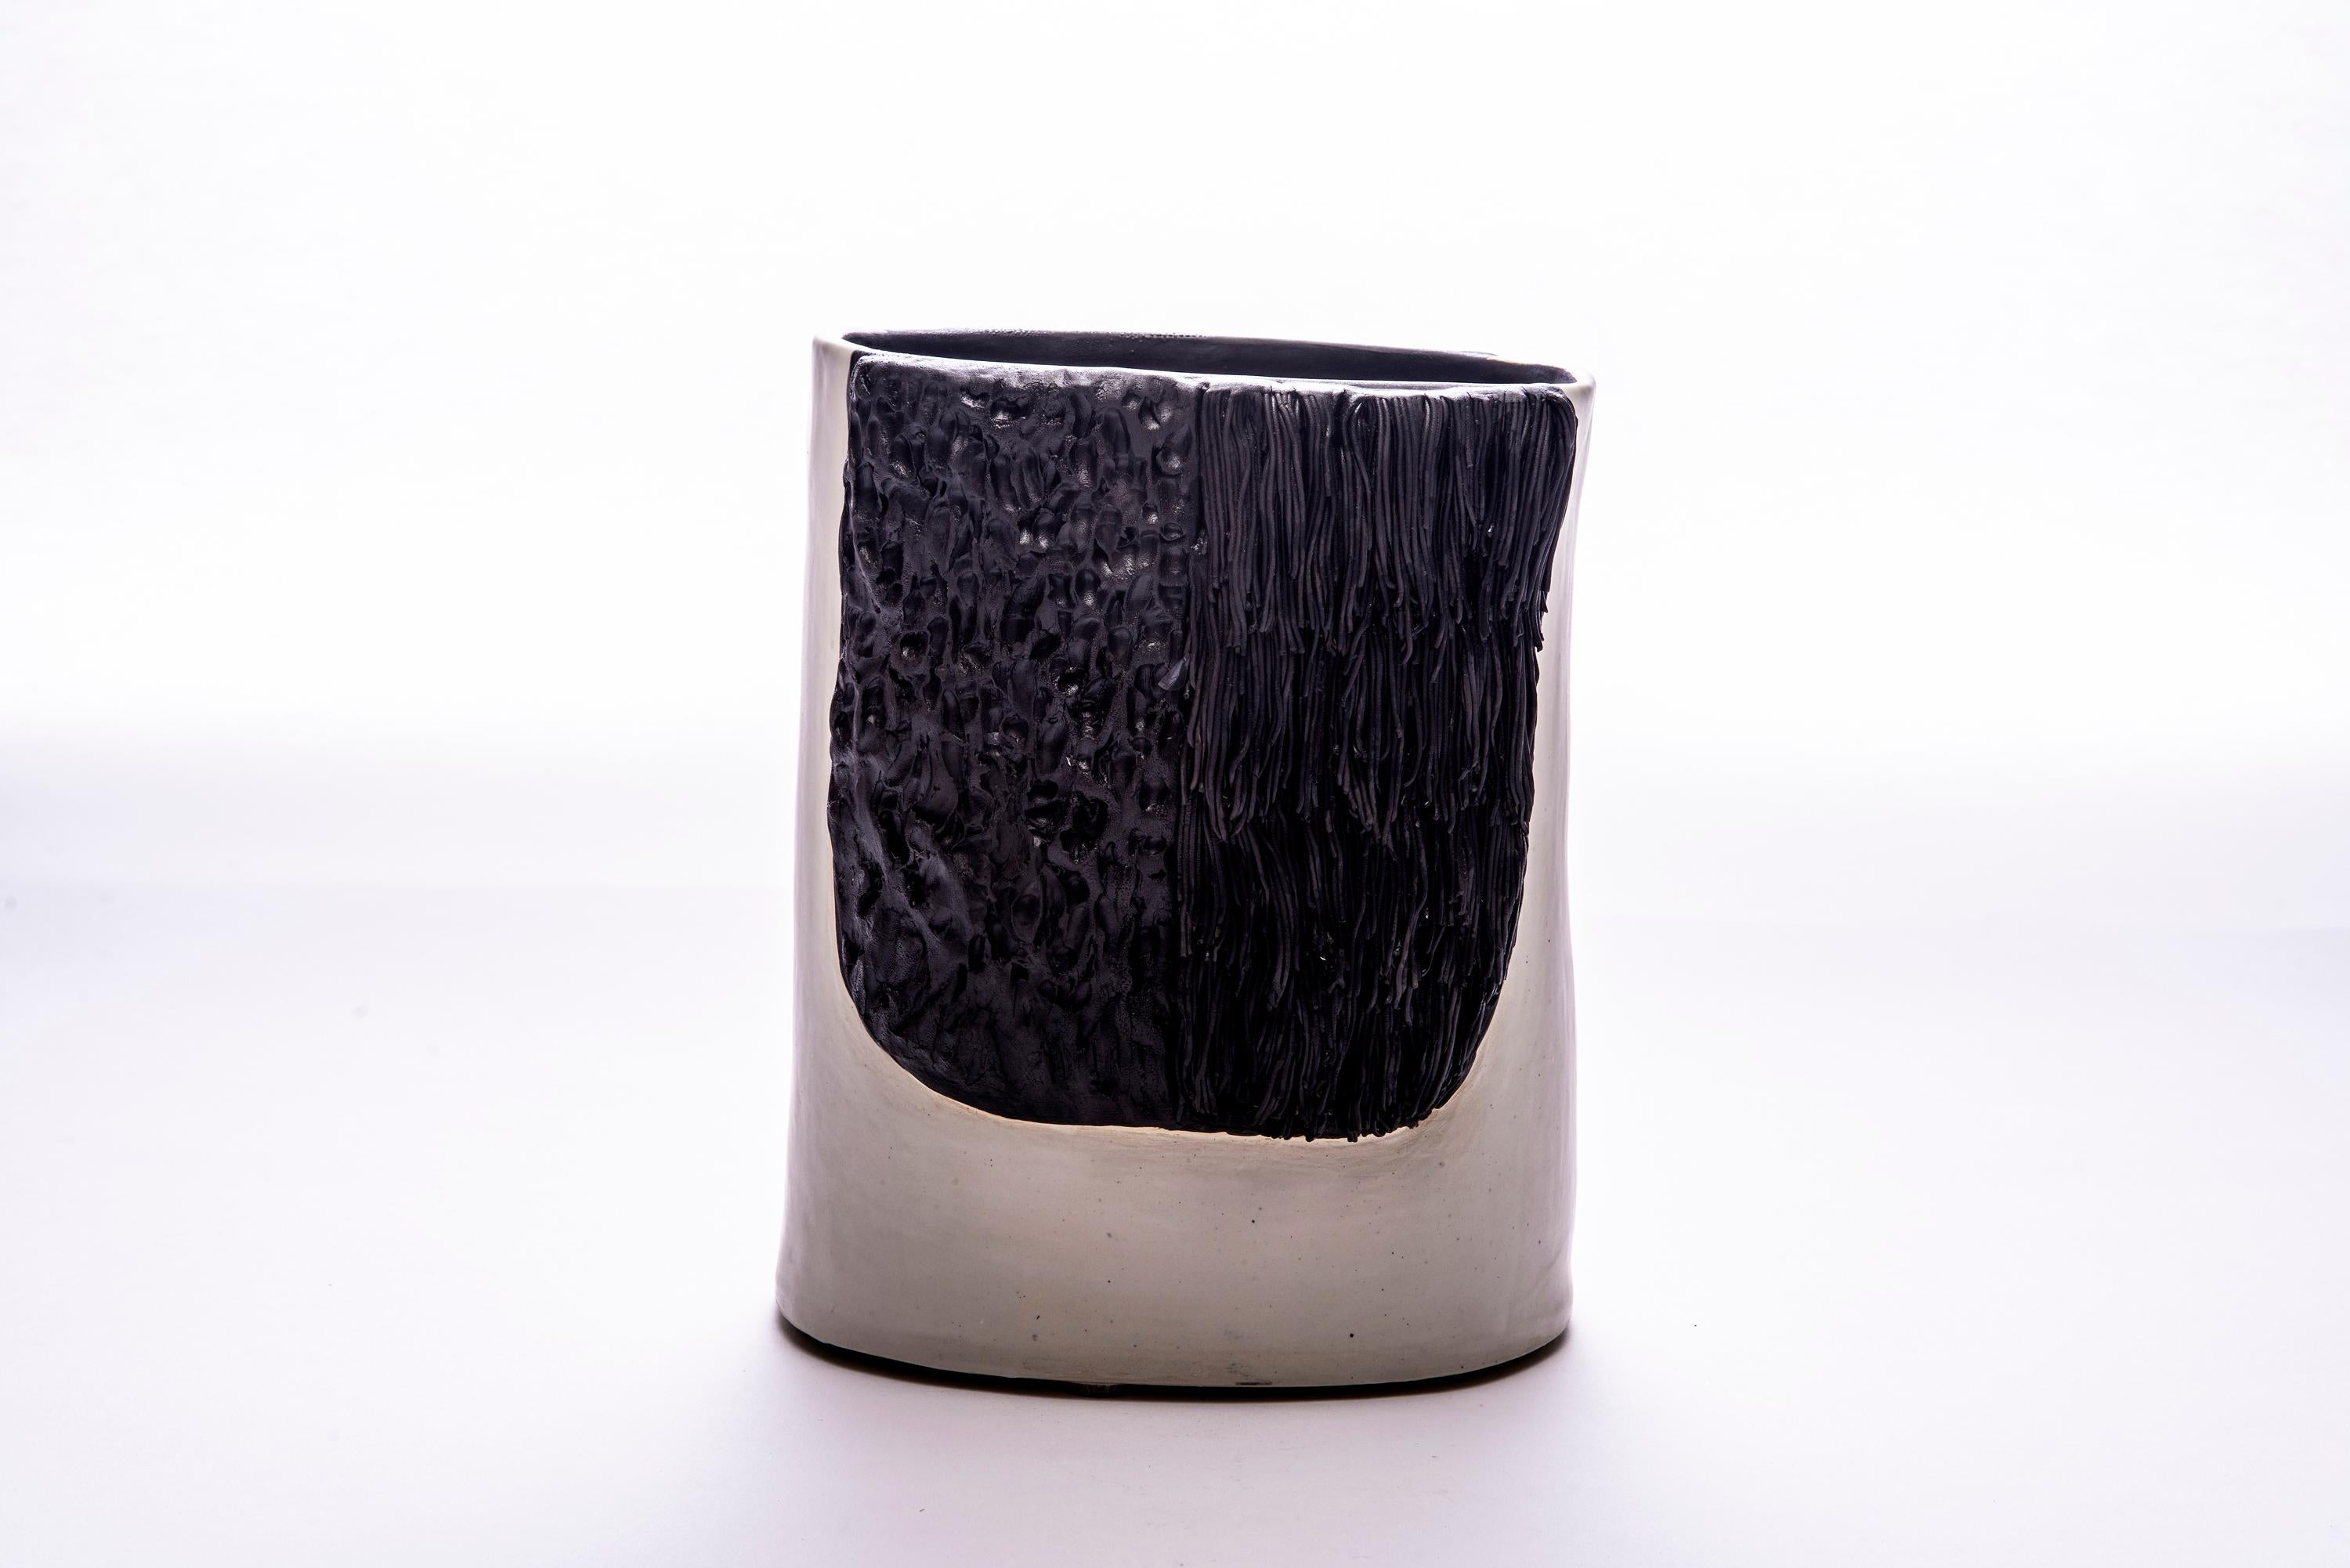 Trish DeMasi
Bruno, 2020
Glazed Ceramic
9.25 x 7 x 6 in

The Moderno collection by Trish DeMasi features geometric shapes, sumptuous textures and pleasing neutral colors in the form of glazed ceramic vessels and boxes.